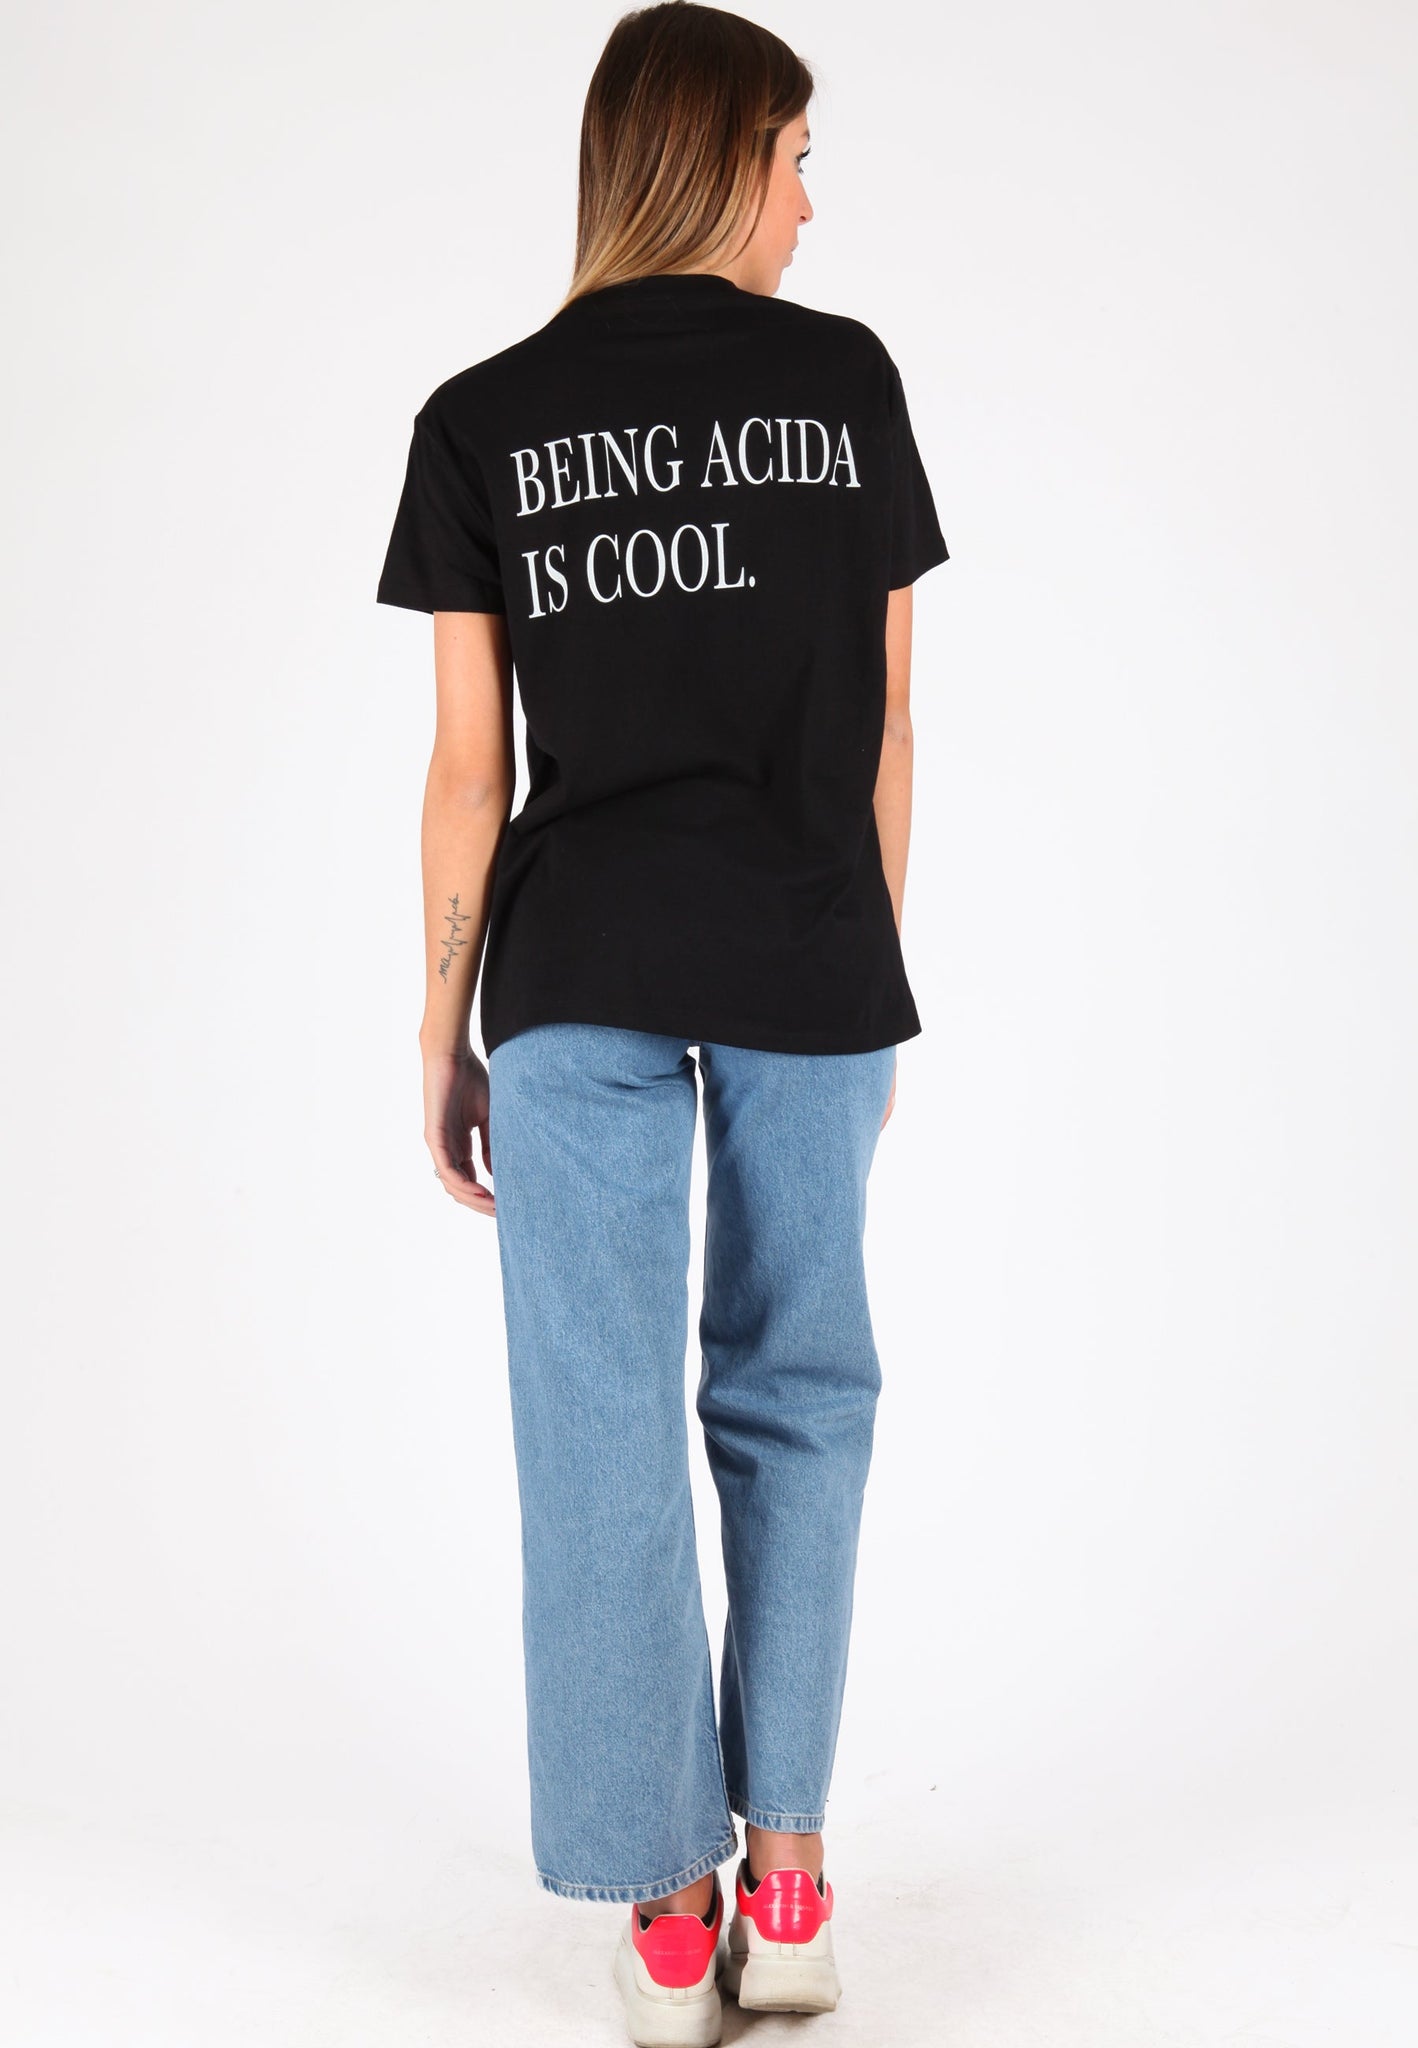 T-Shirt  "Being acida is cool"